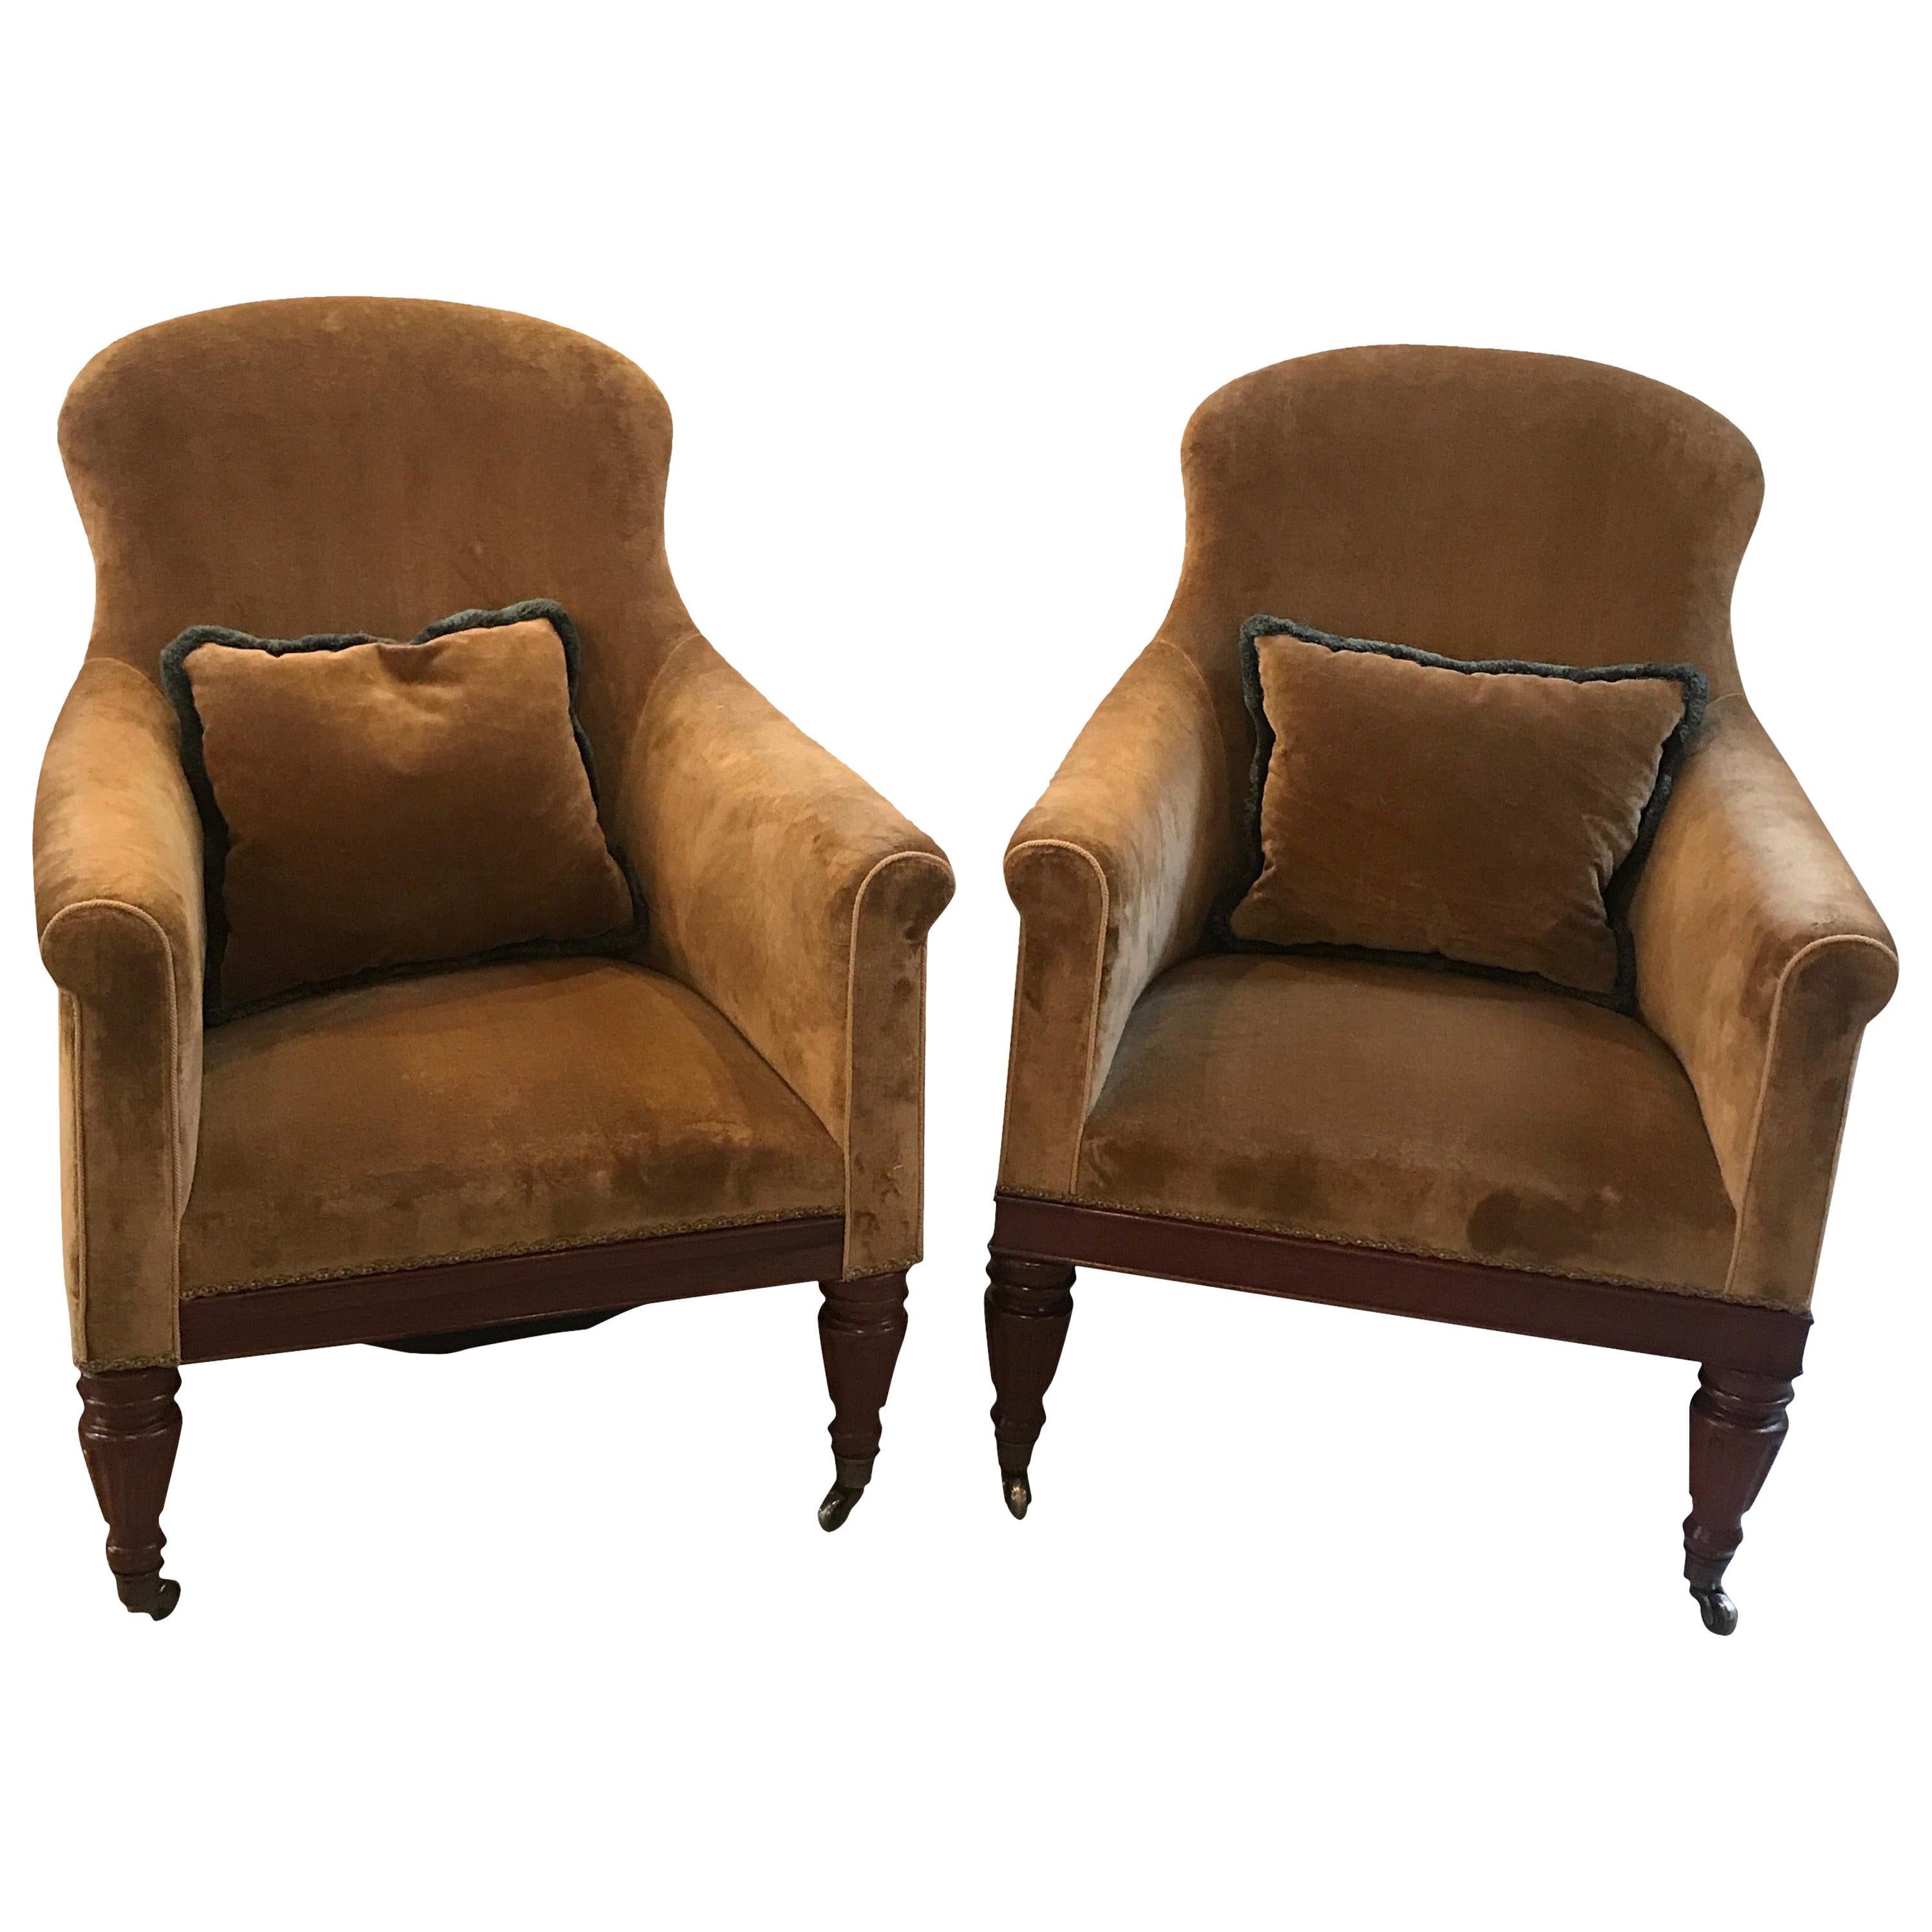 Pair of Early 20th Century High Back Tub Chairs